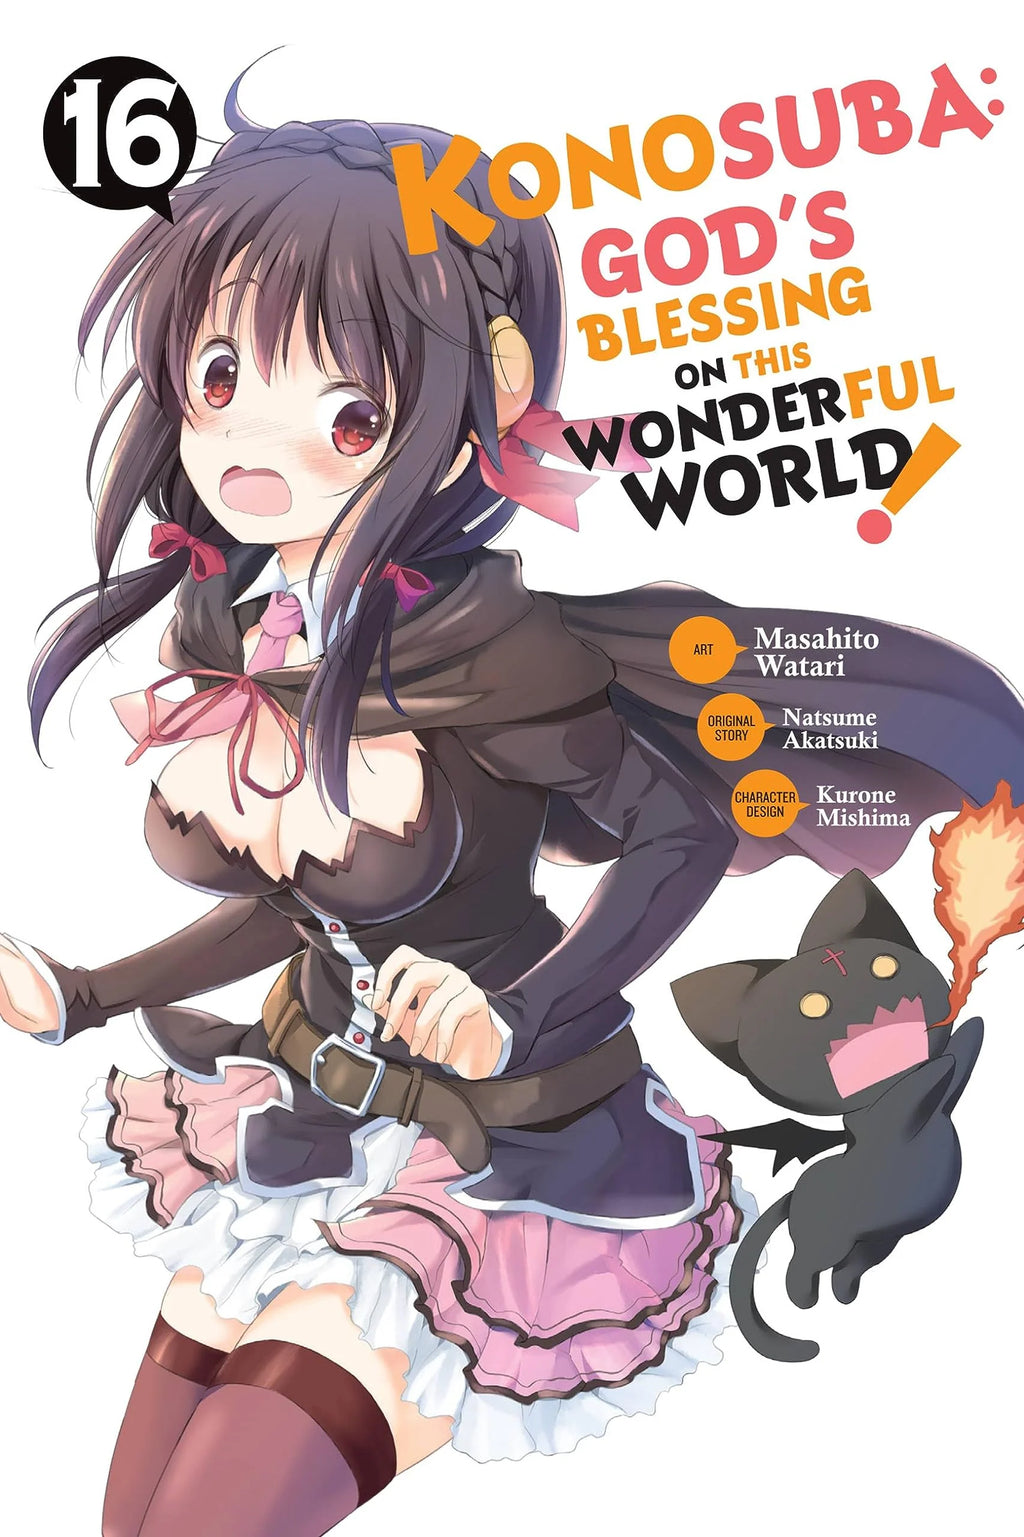 Konosuba: God's Blessing on This Wonderful World!, Vol. 3 (Light Novel):  You're Being Summoned, Darkness